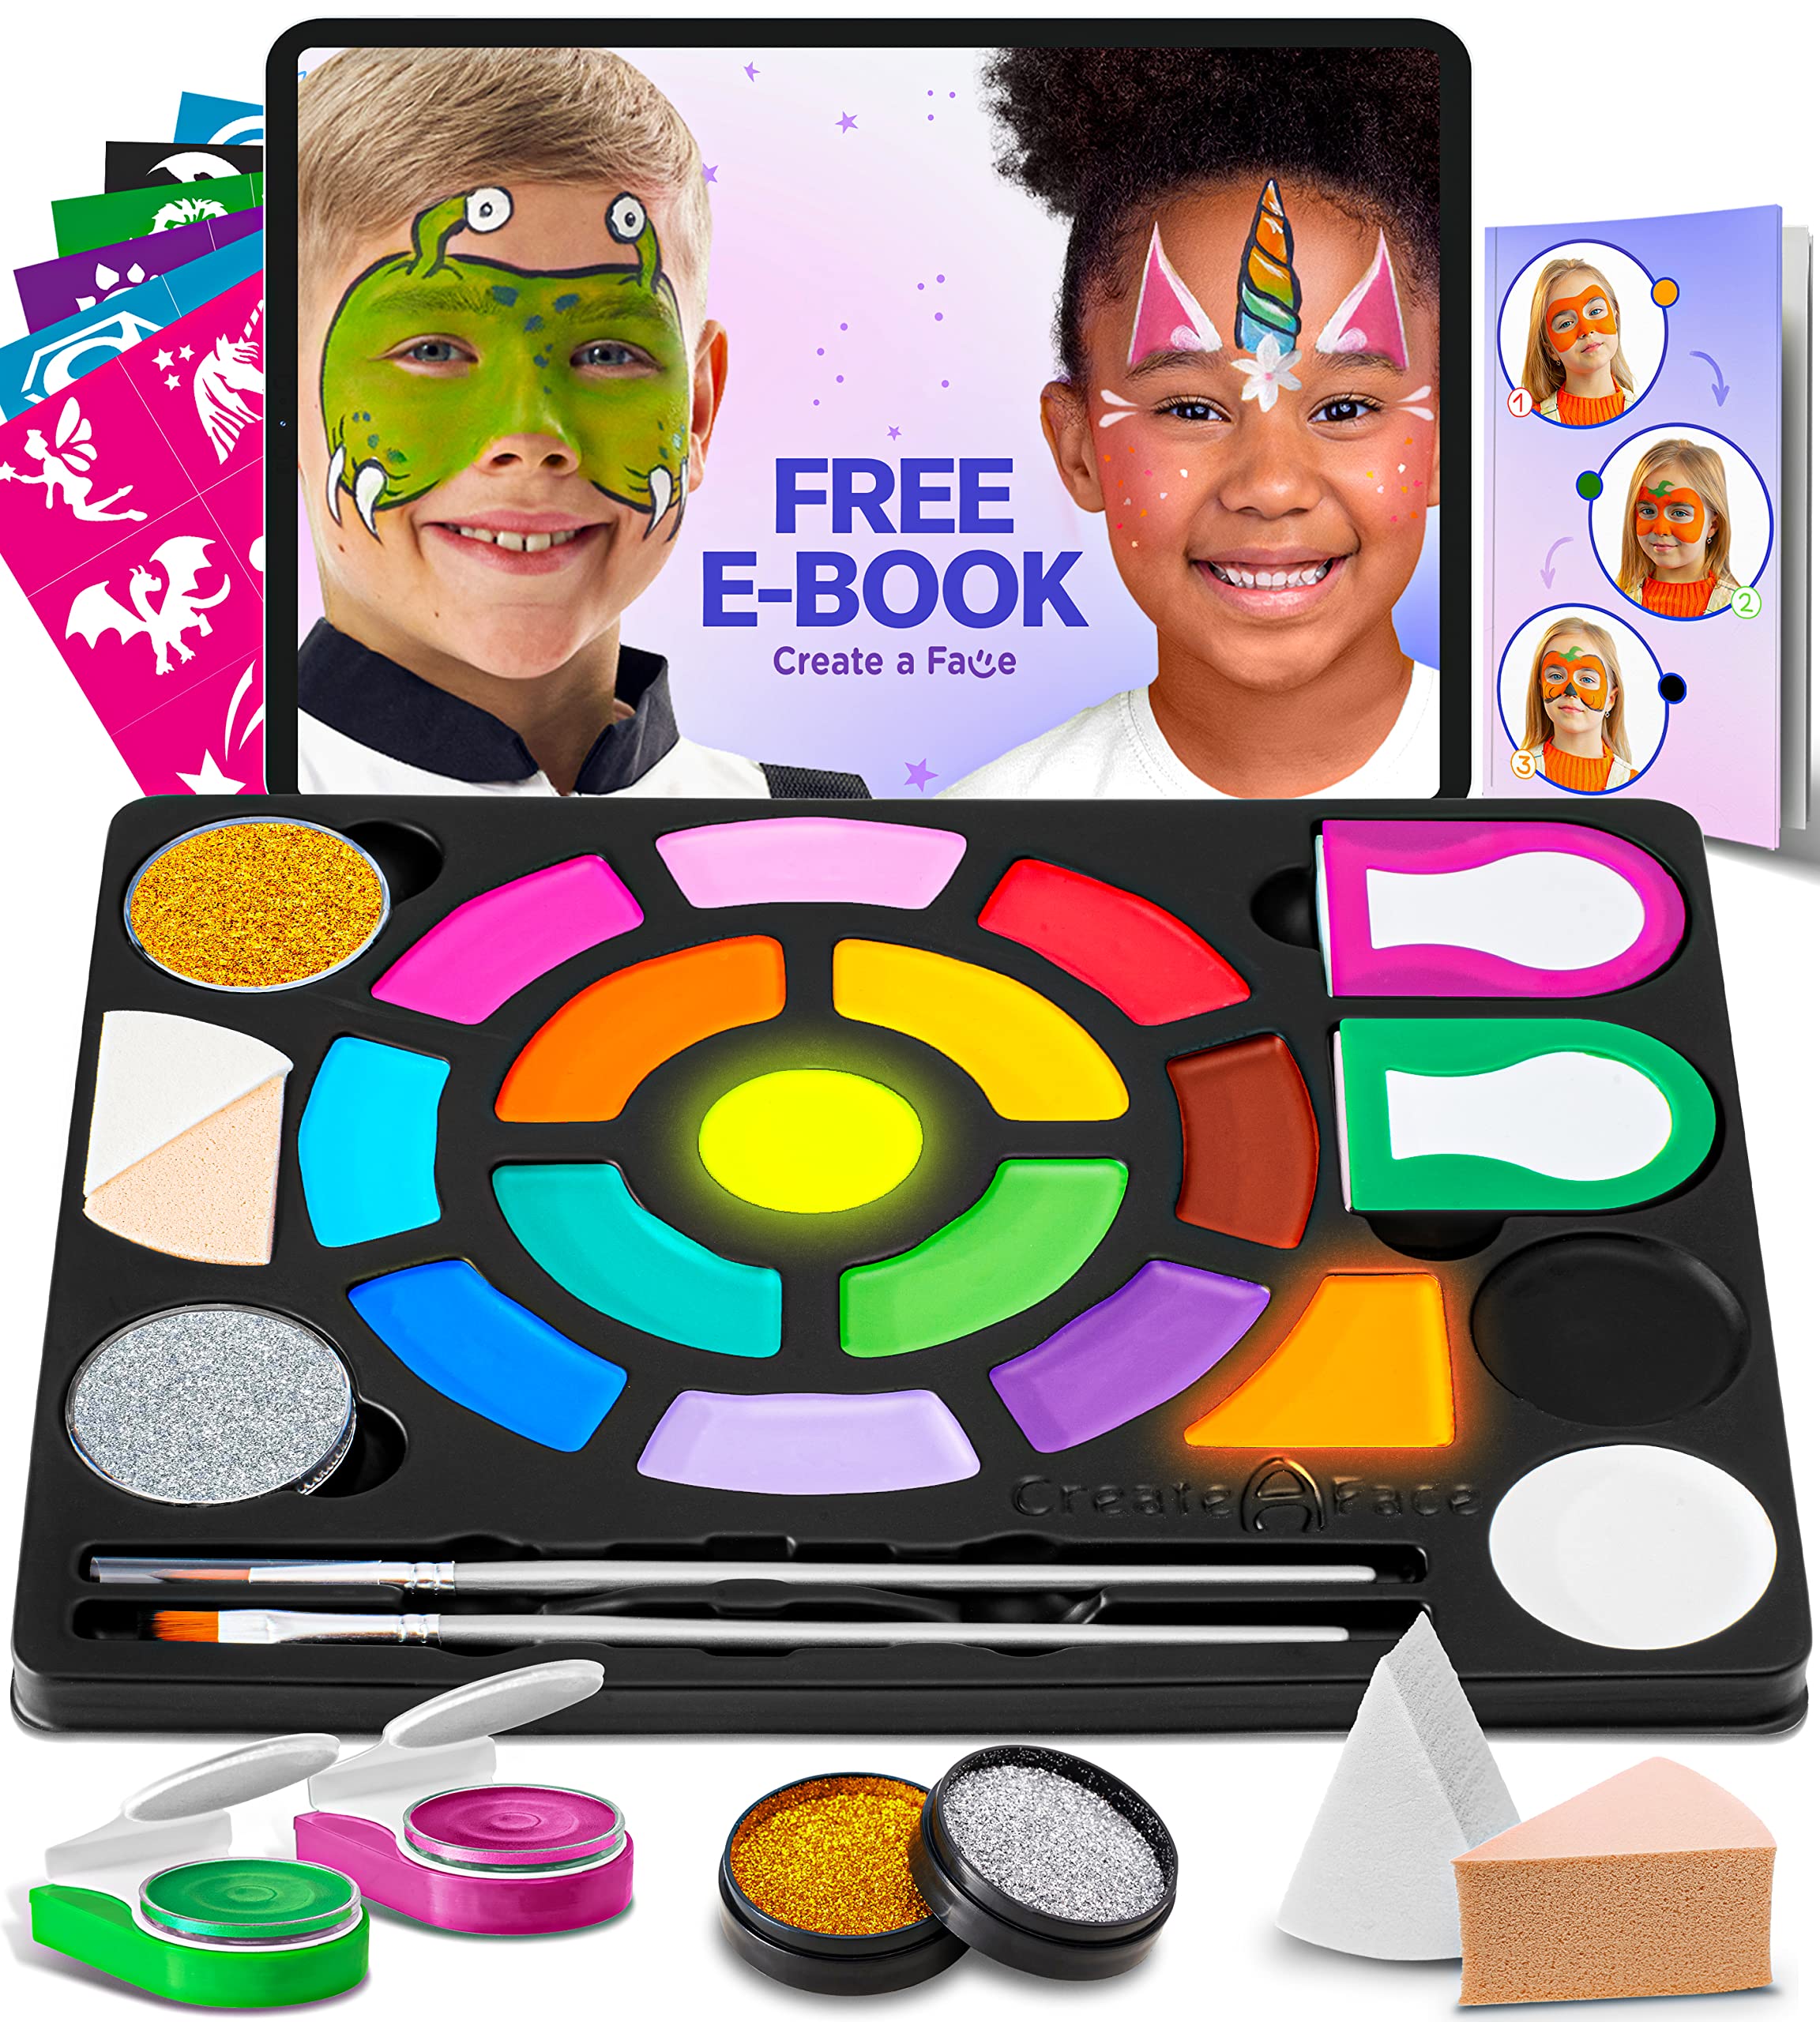 10 Things a Professional Facepainter Wants You to Know  Face paint kit,  Face paint set, Face painting tutorials